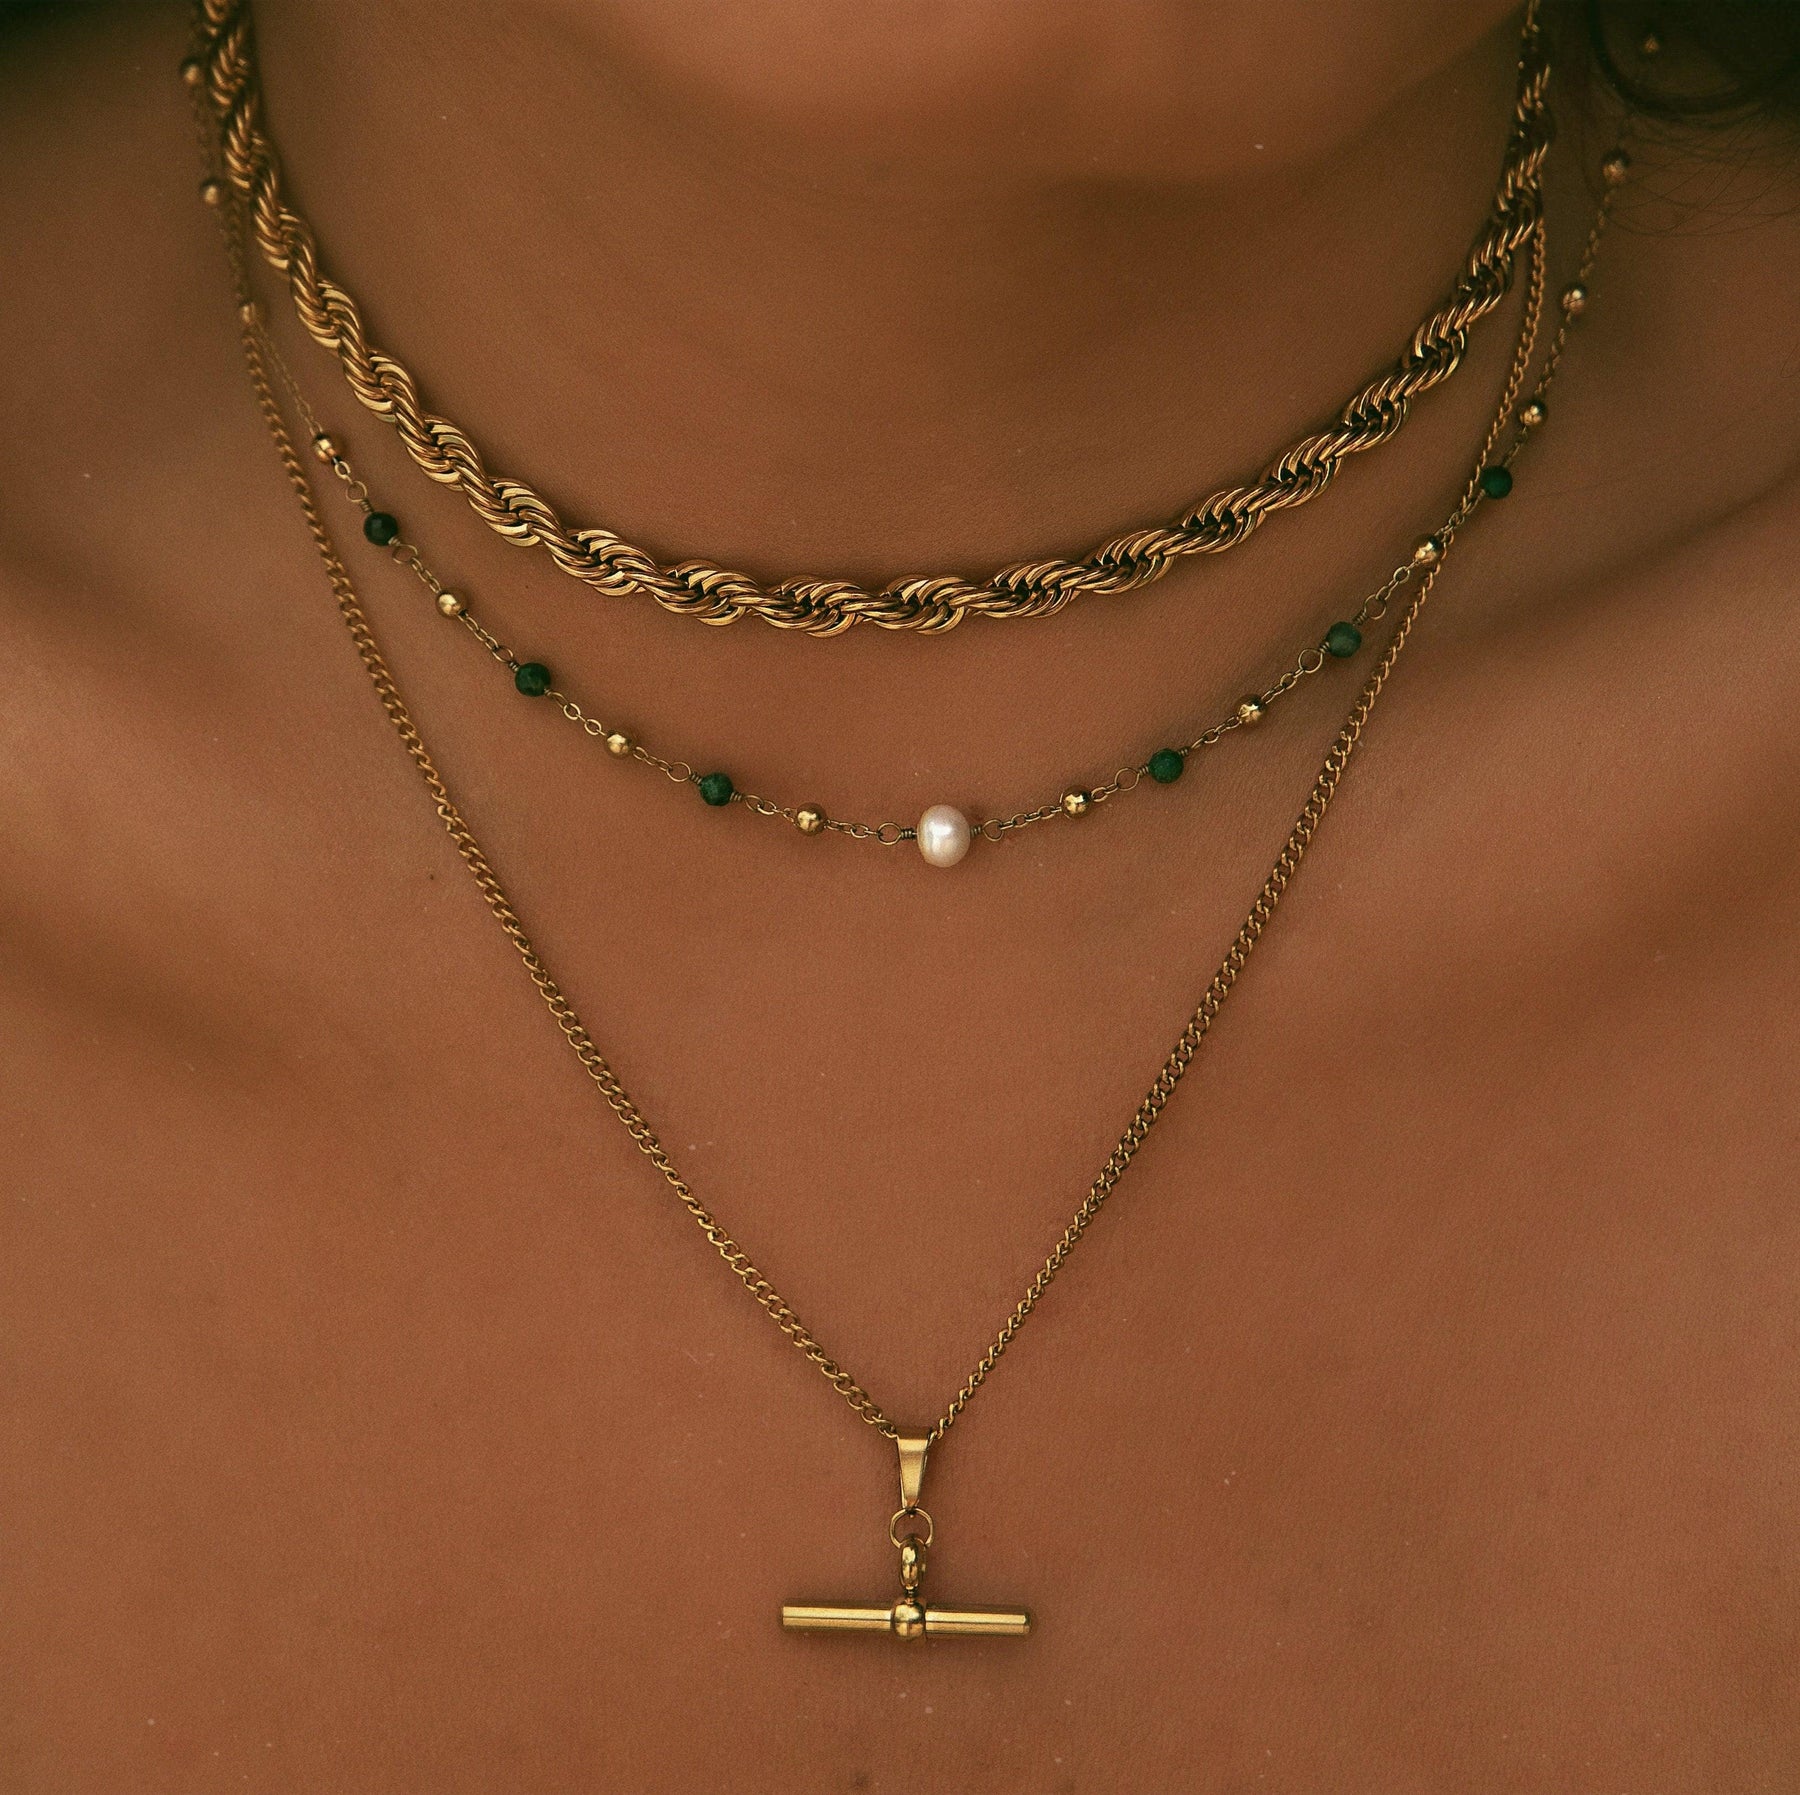 BohoMoon Stainless Steel Set Sail Tbar Necklace Gold